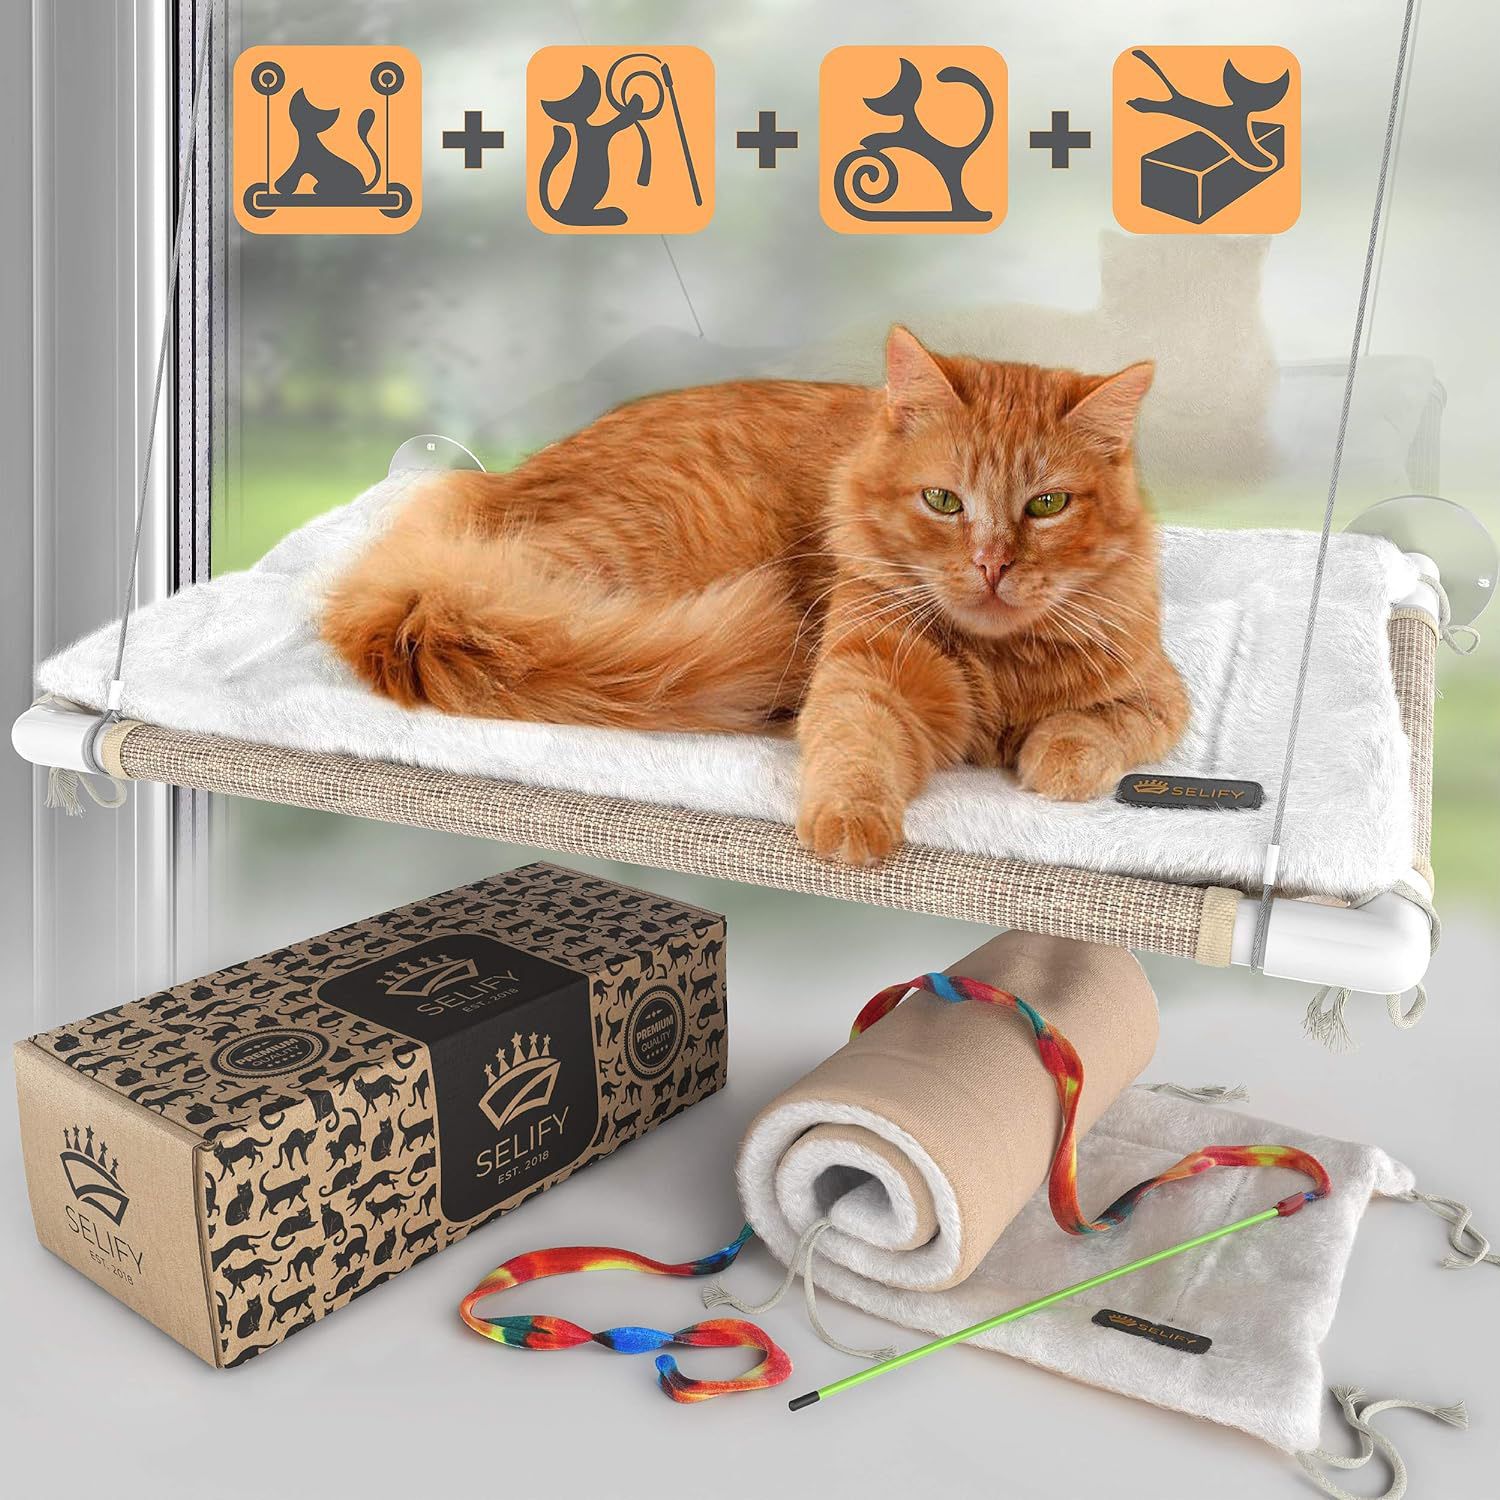 Cat Window Perch - Free Fleece Blanket and Toy - Extra Large and Sturdy - Holds